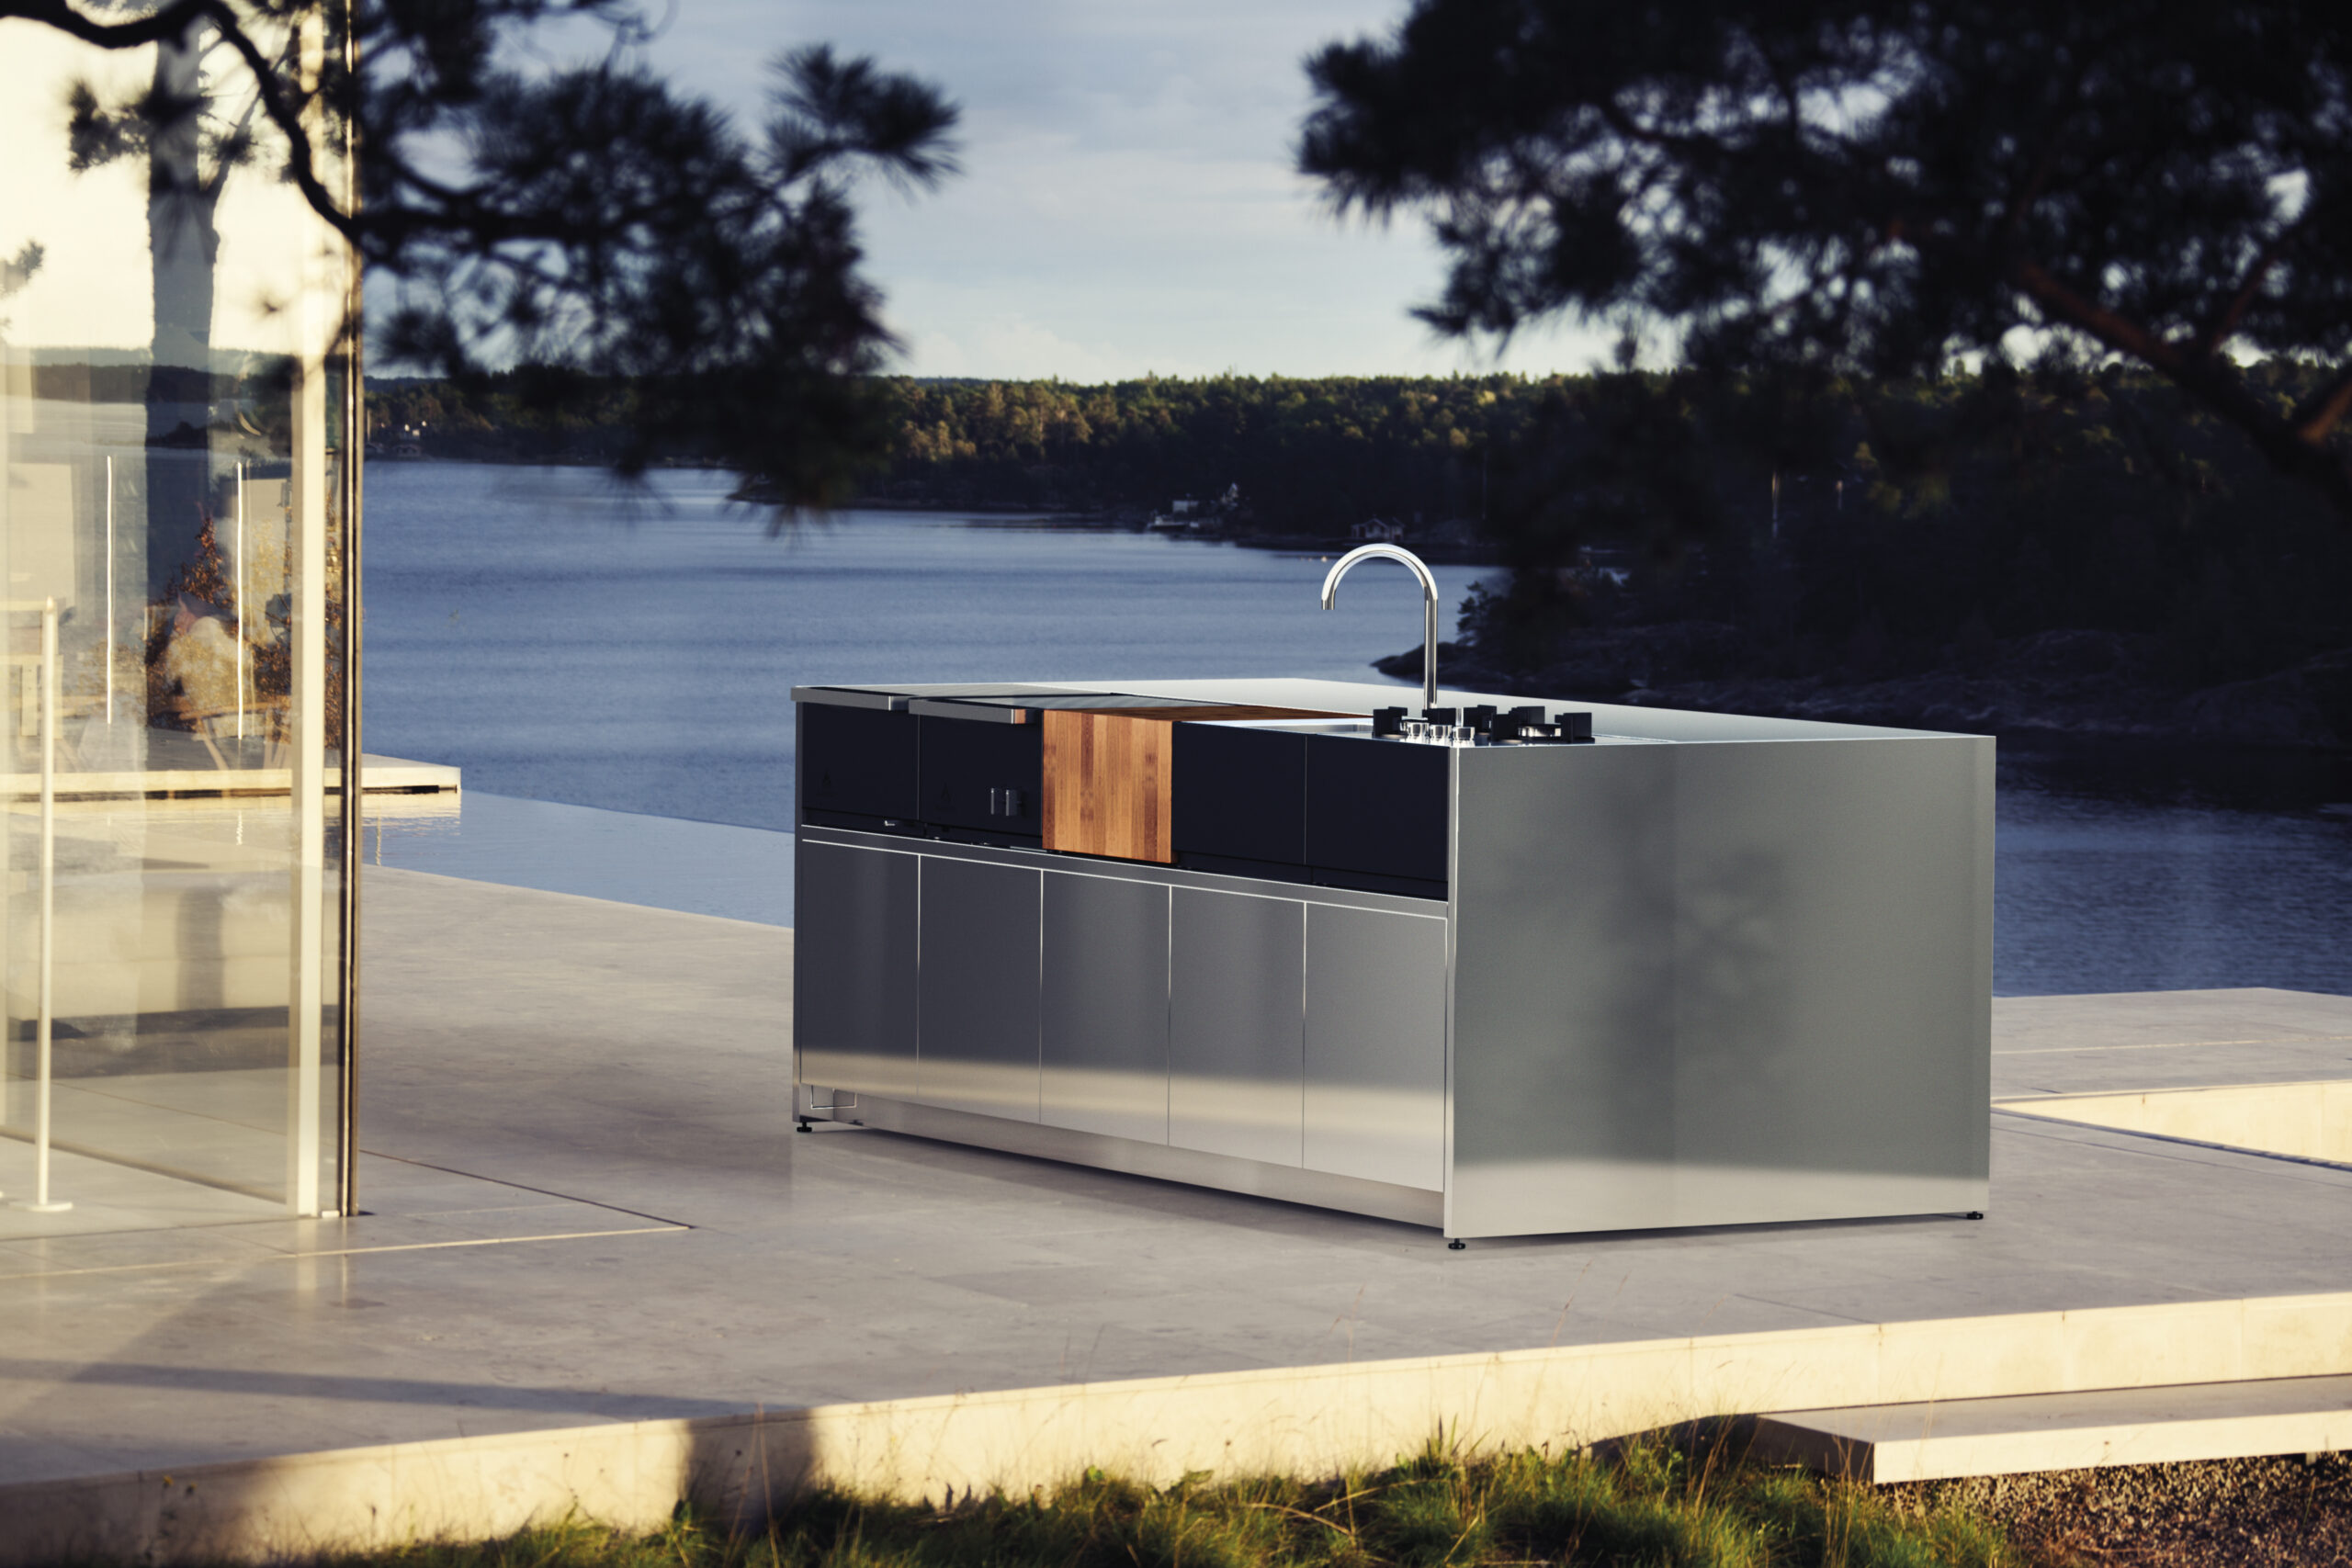 https://www.coutureoutdoor.com/wp-content/uploads/2017/10/Modular-Outdoor-kitchen-with-counter-scaled.jpg